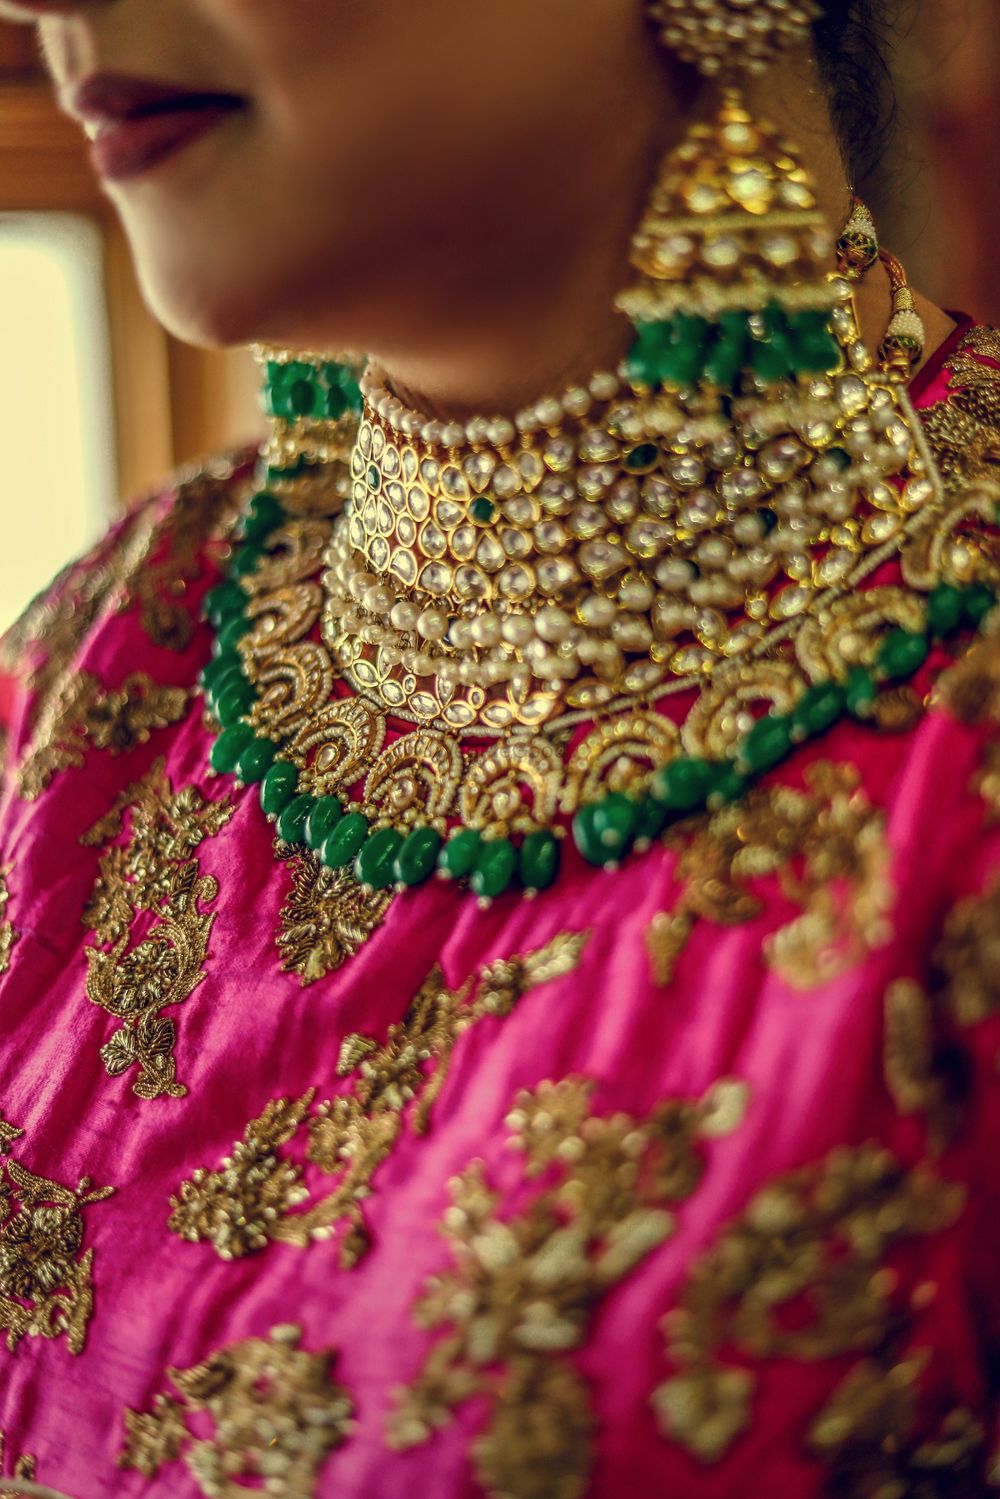 Photo of Bridal jewellery with green beads and bib necklace